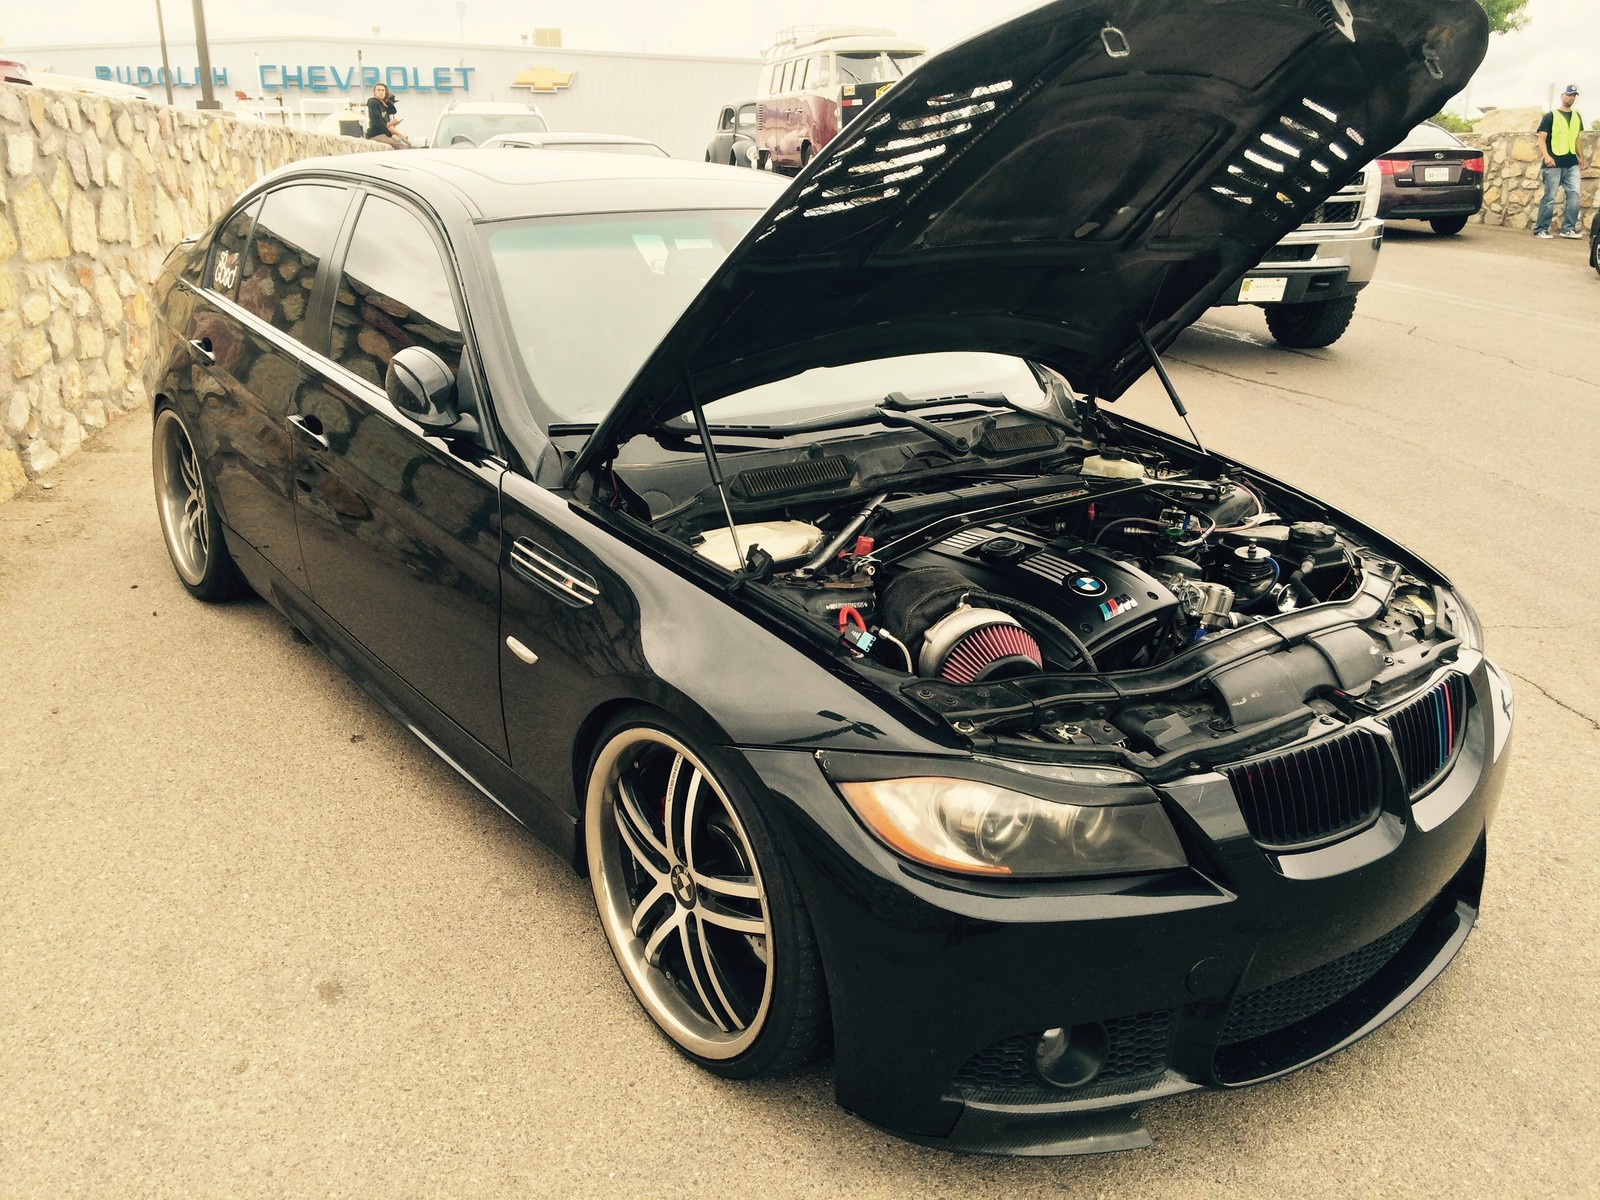 This BMW E90 335i Just Put Down 741 WHP and 624 lbft of